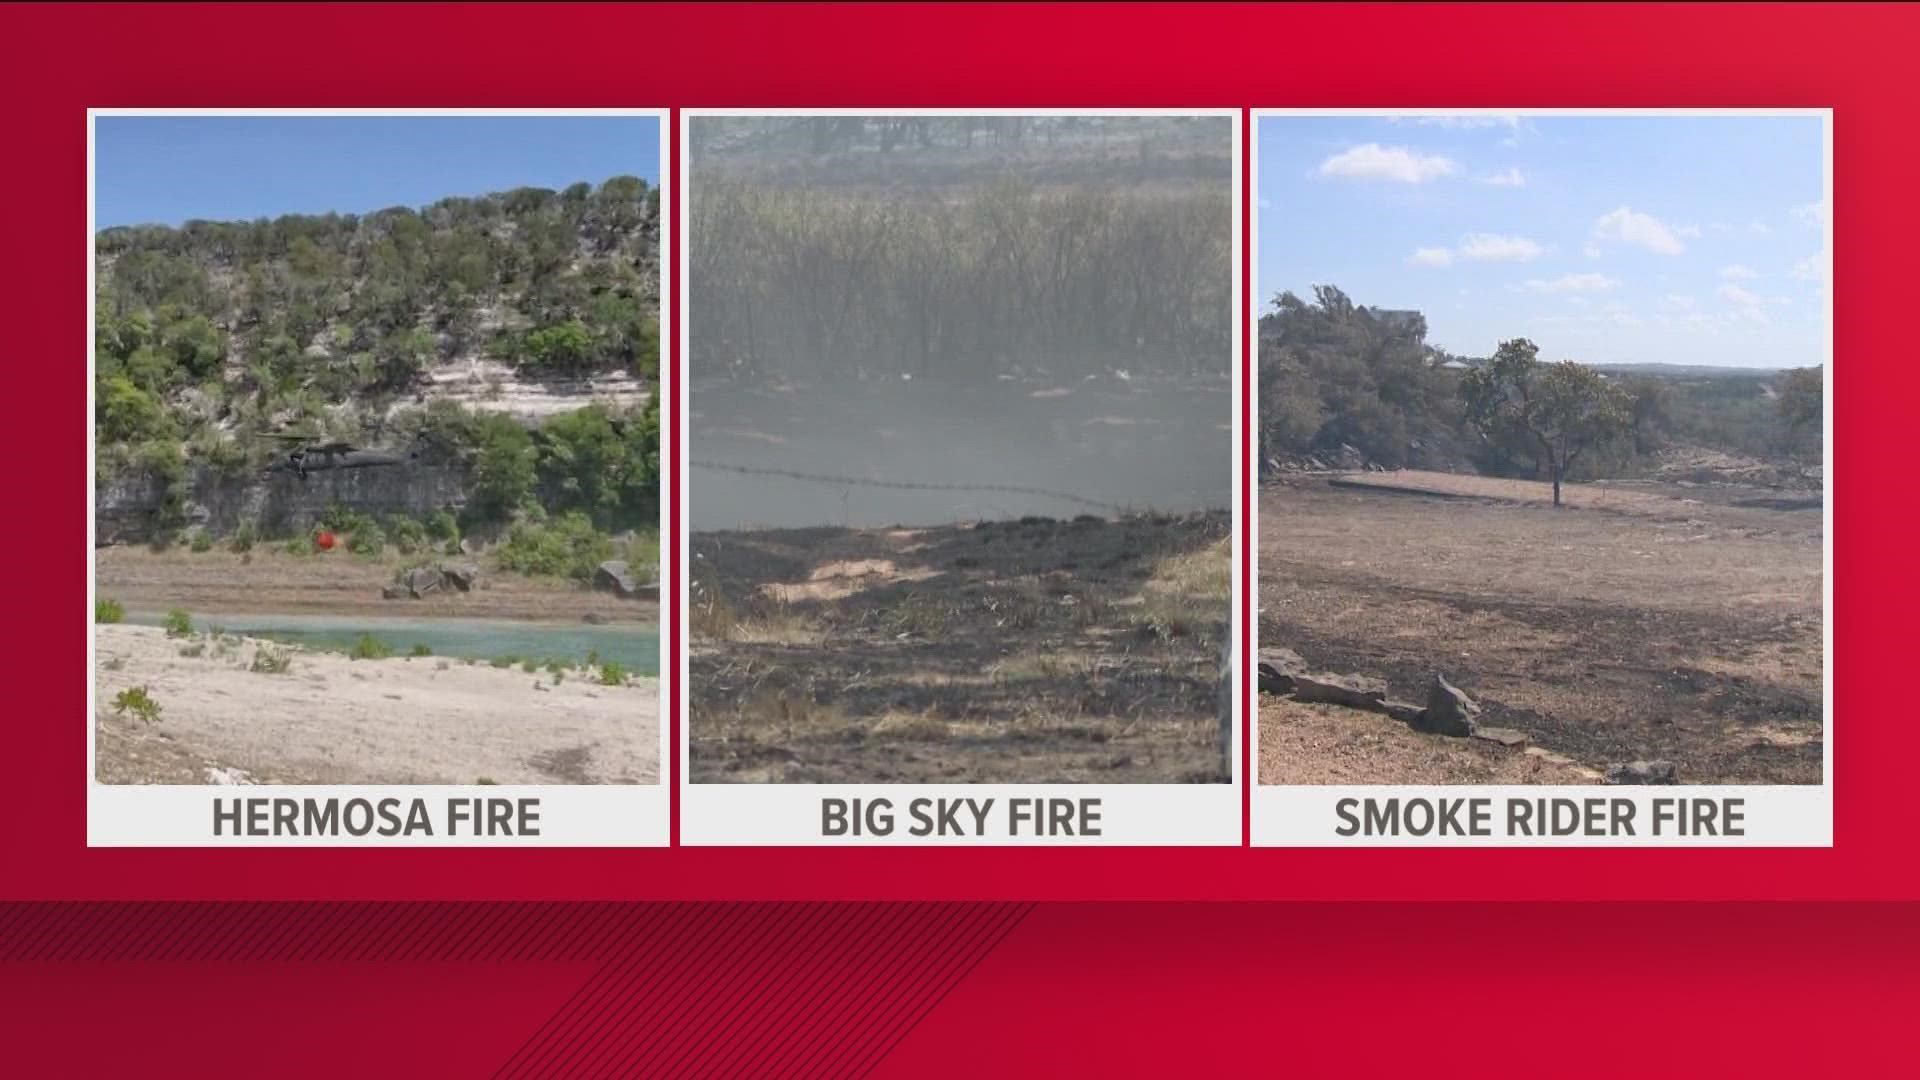 In total, the three fires in the area have burned through thousand of acres.